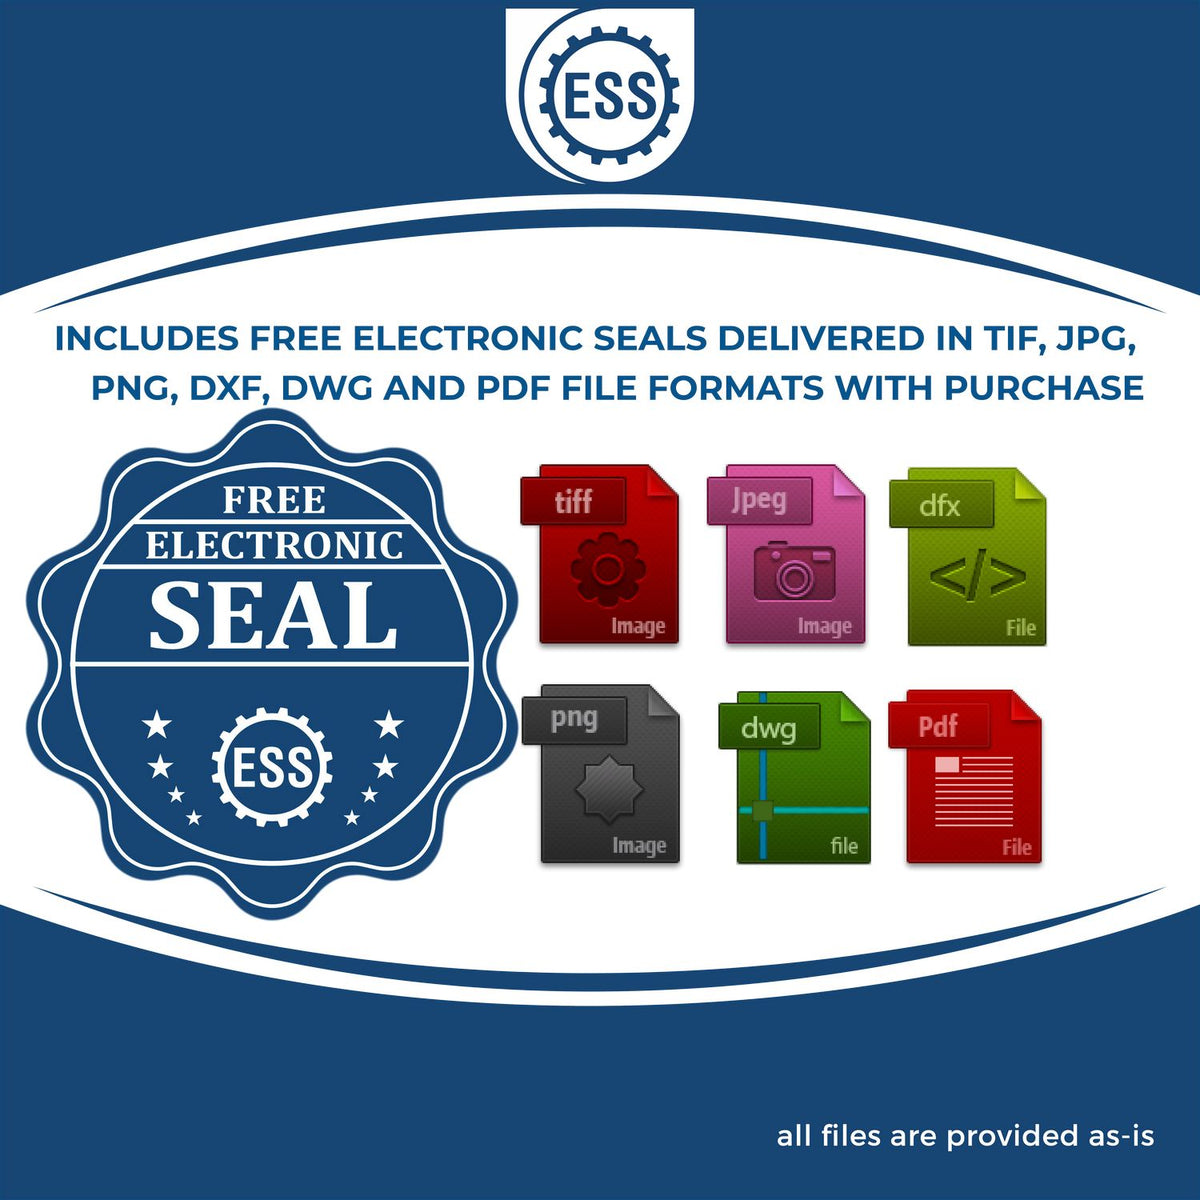 An infographic for the free electronic seal for the Missouri Professional Engineer Seal Stamp illustrating the different file type icons such as DXF, DWG, TIF, JPG and PNG.